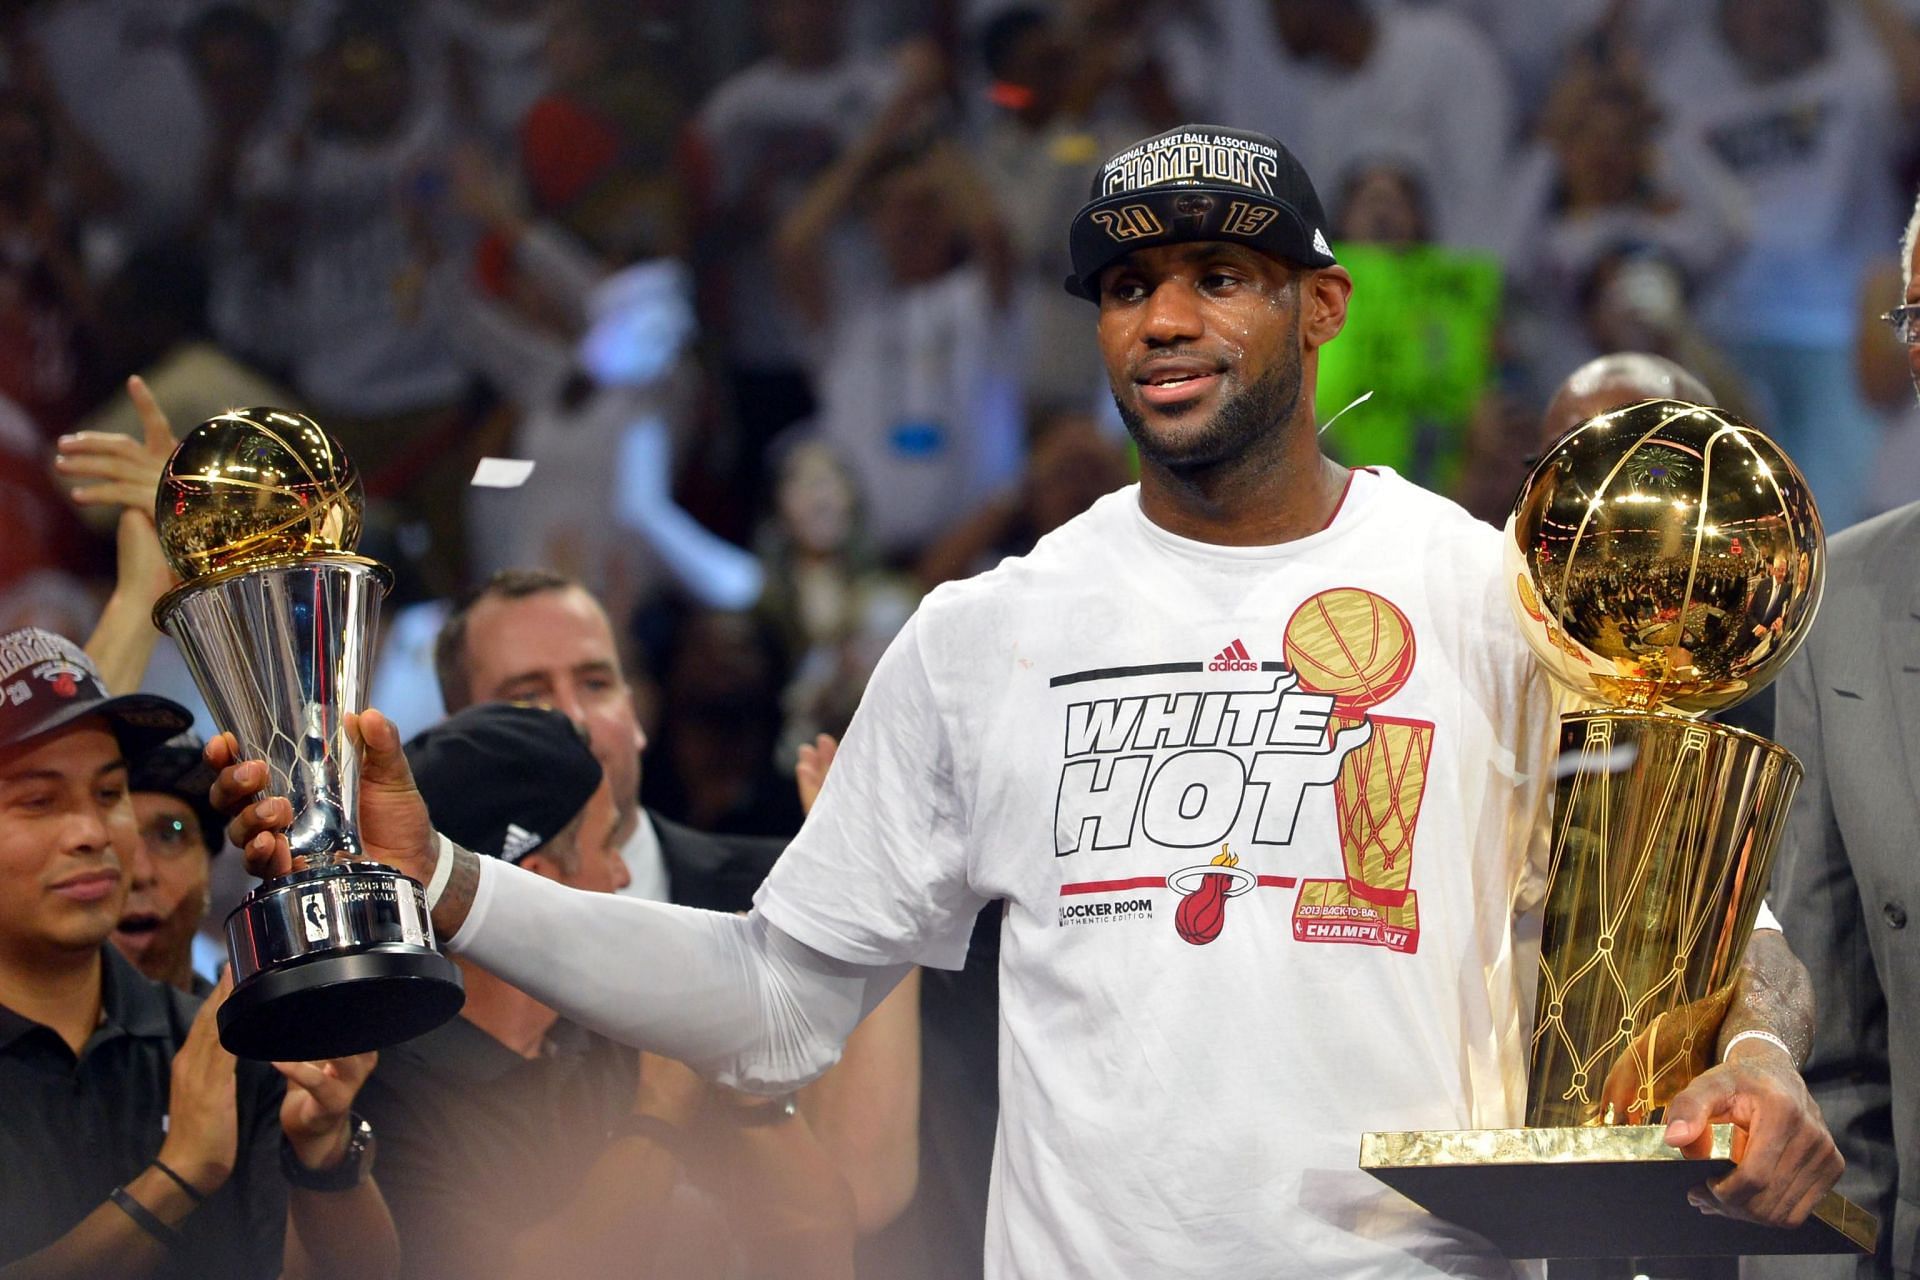 The 2012-13 season for LeBron James will go down as one of the best